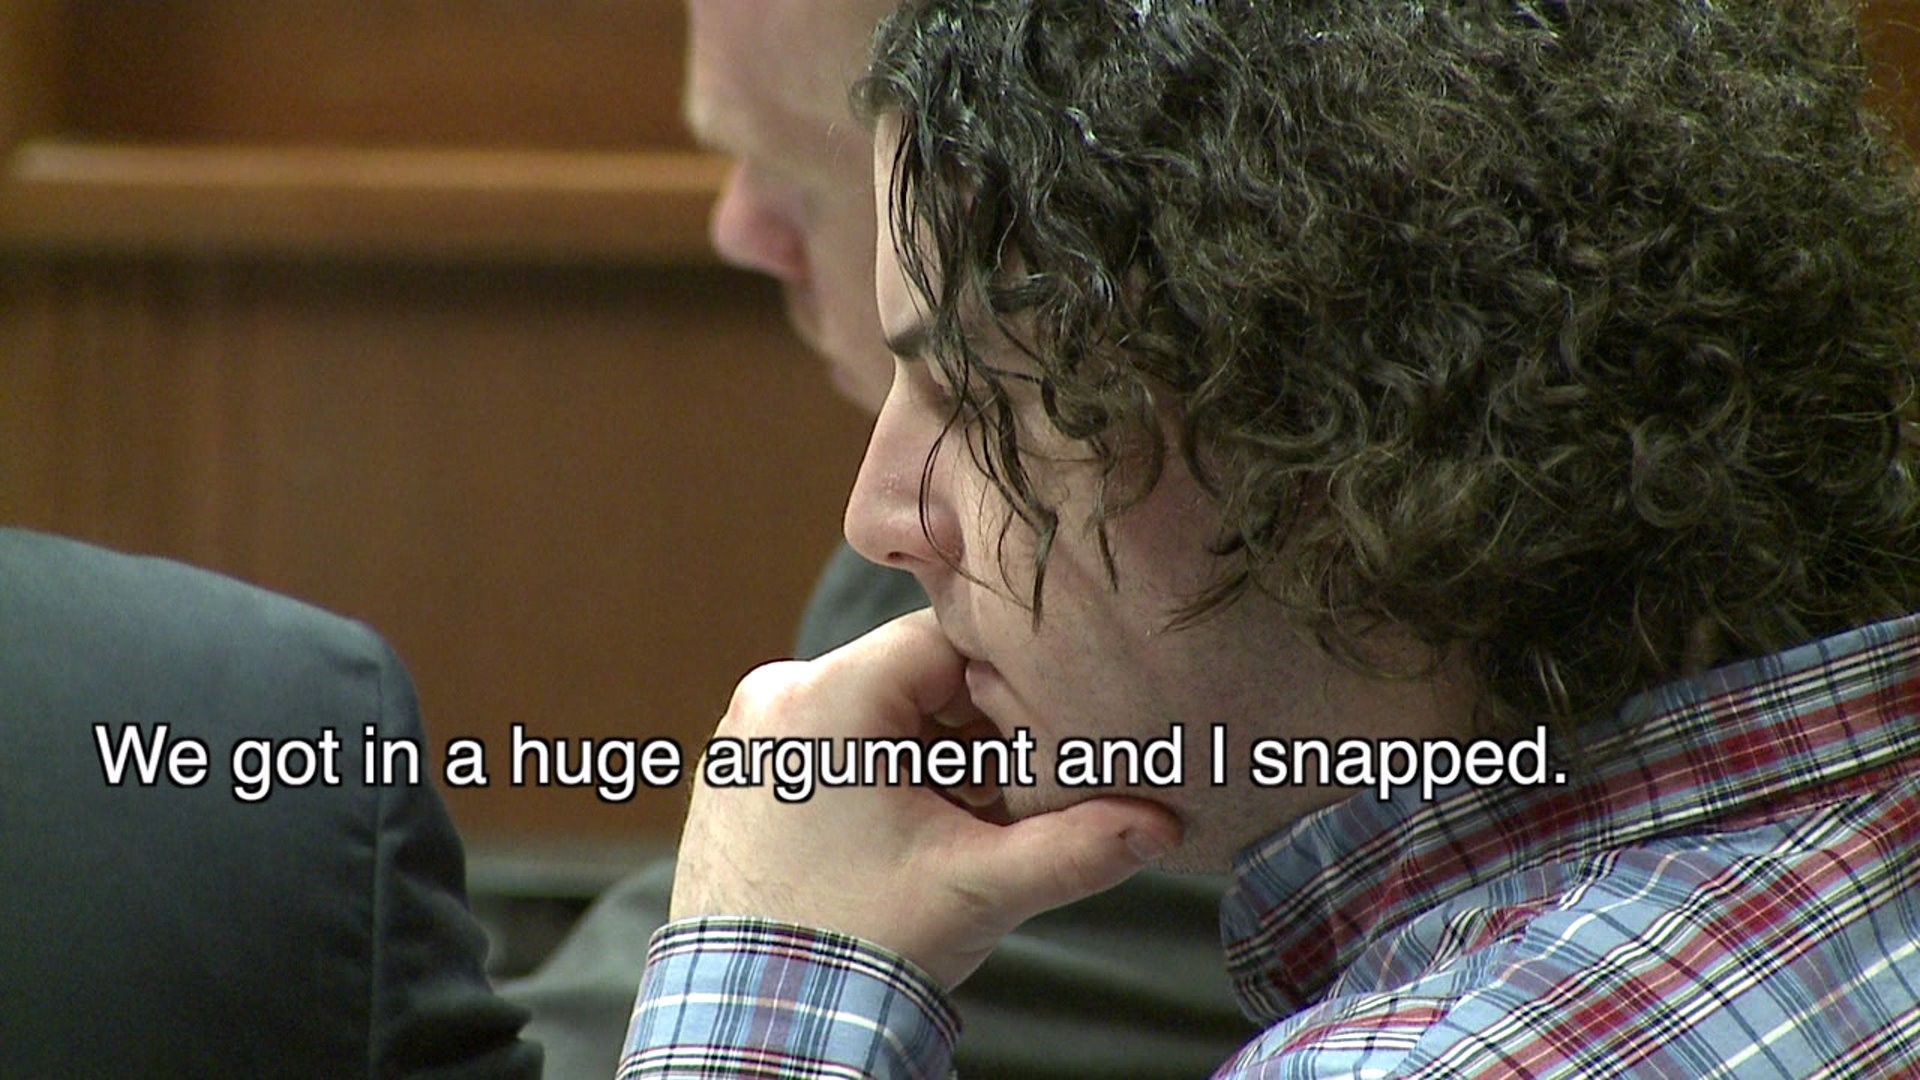 Sean Freese called friend, saying he "snapped" the night of parents murders